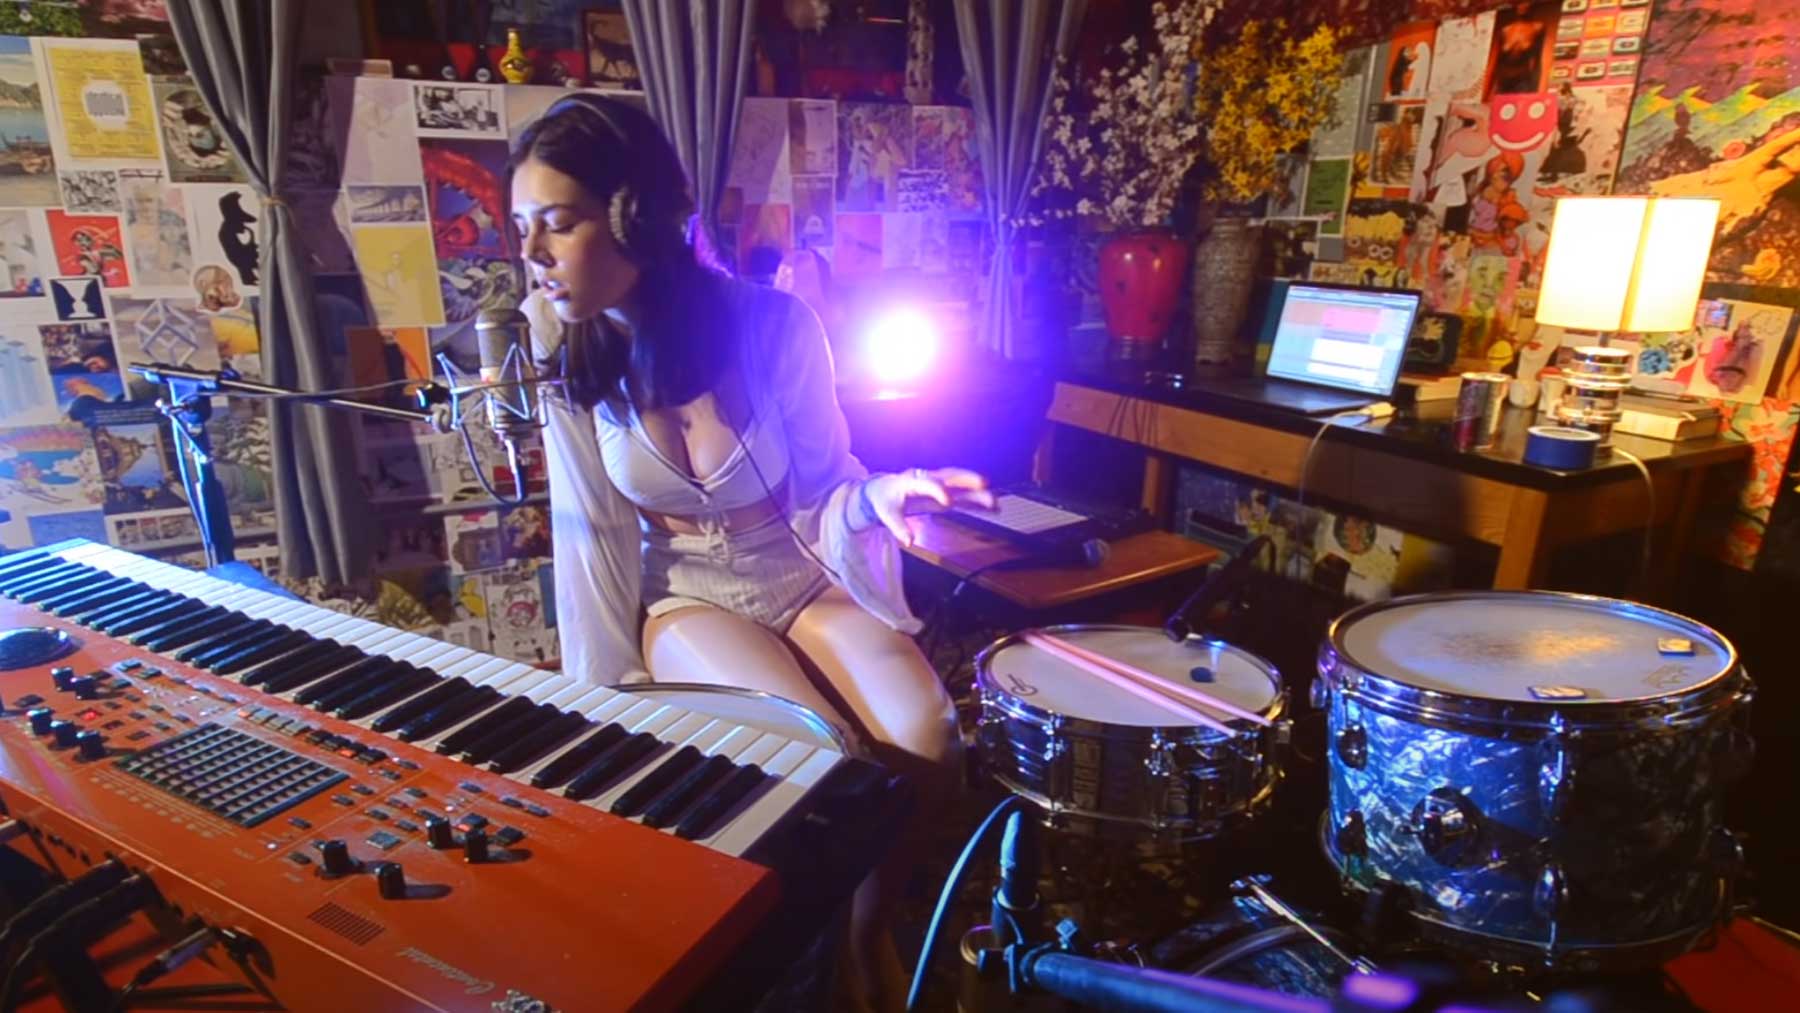 Live-Looping-Session: Elise Trouw - "How to Get What You Want" Elise-Trouw-How-to-Get-What-You-Want-Live-Loop-Video 